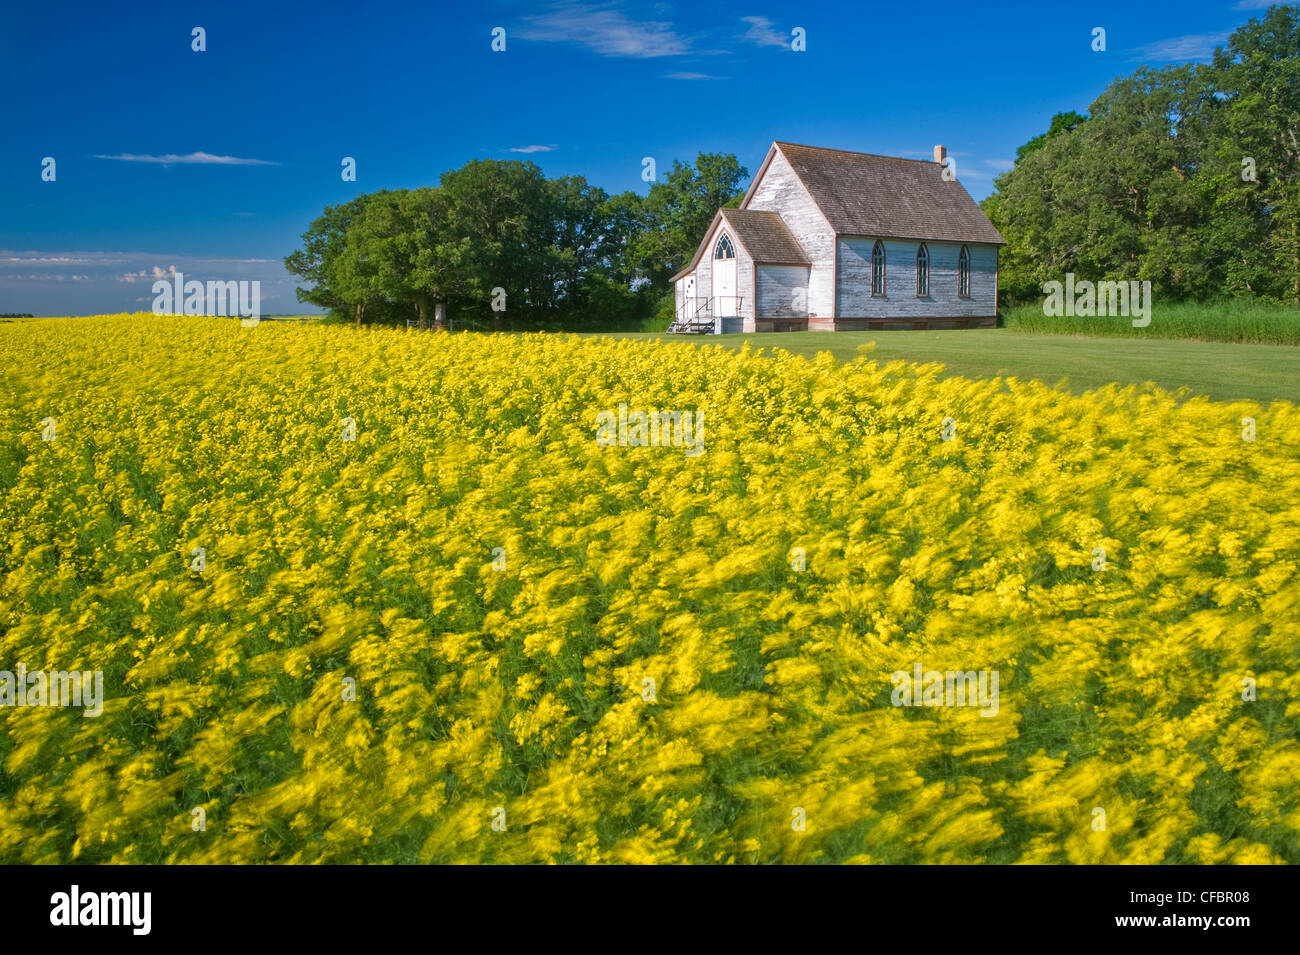 Windblown blooming canola field with old church in the background, Tiger Hills, Manitoba, Canada Stock Photo